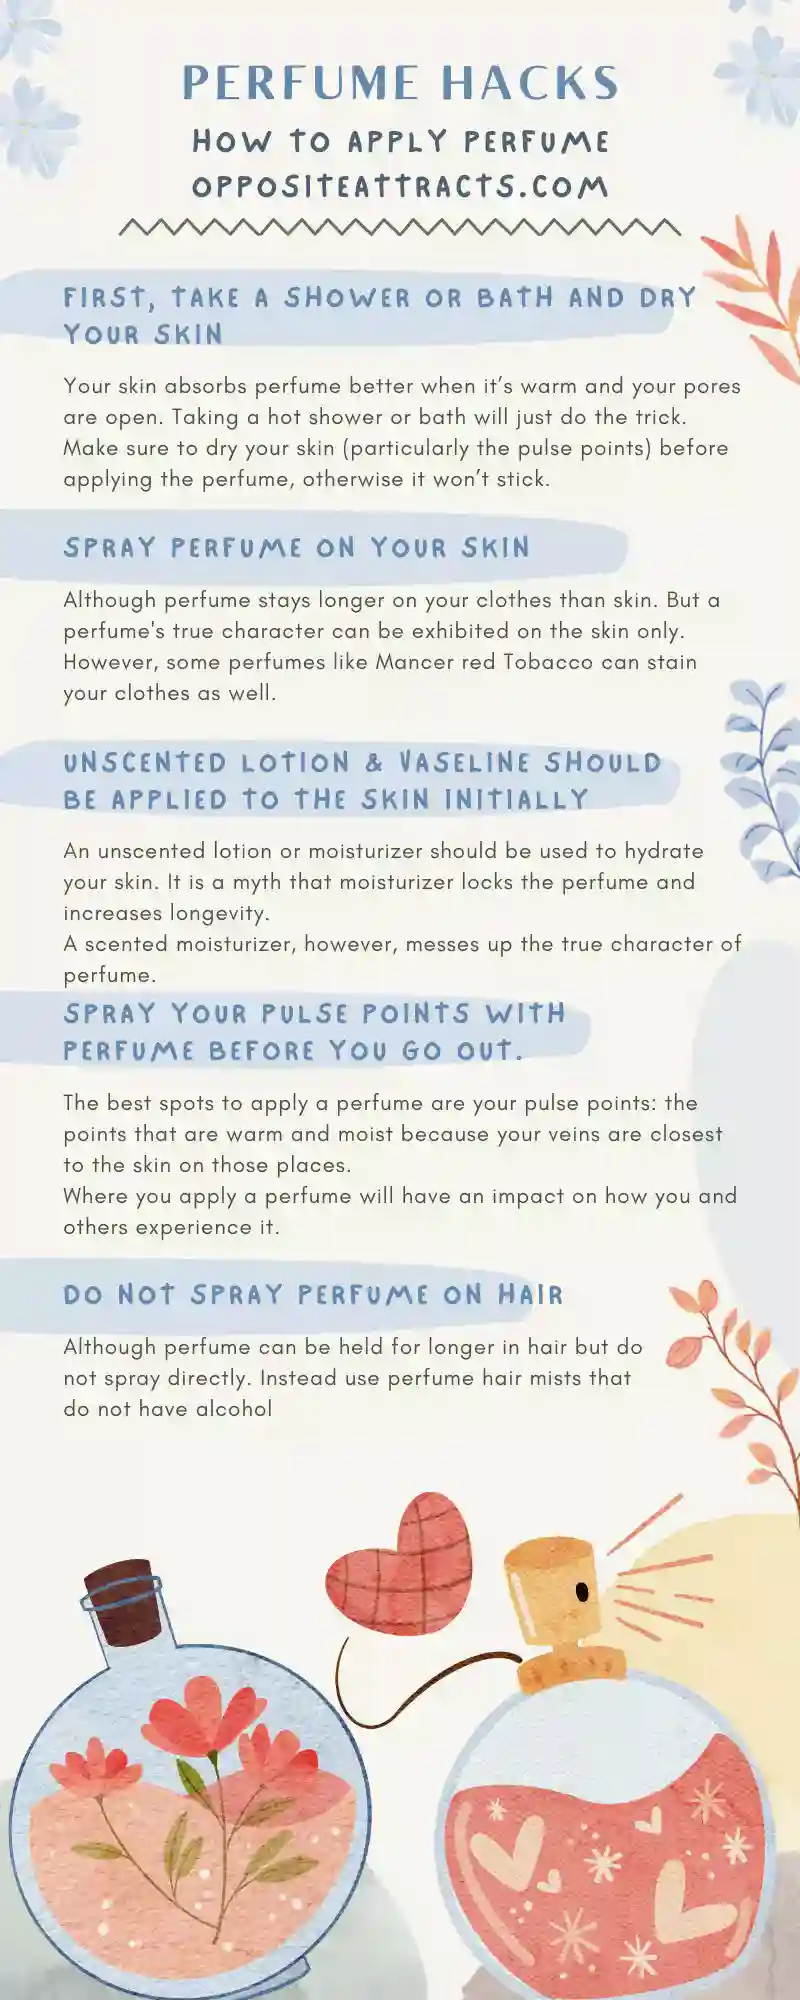 infographic on how to apply perfume in the right way. Tips and tricks are mentioned in the summarized form which are part of this article as well